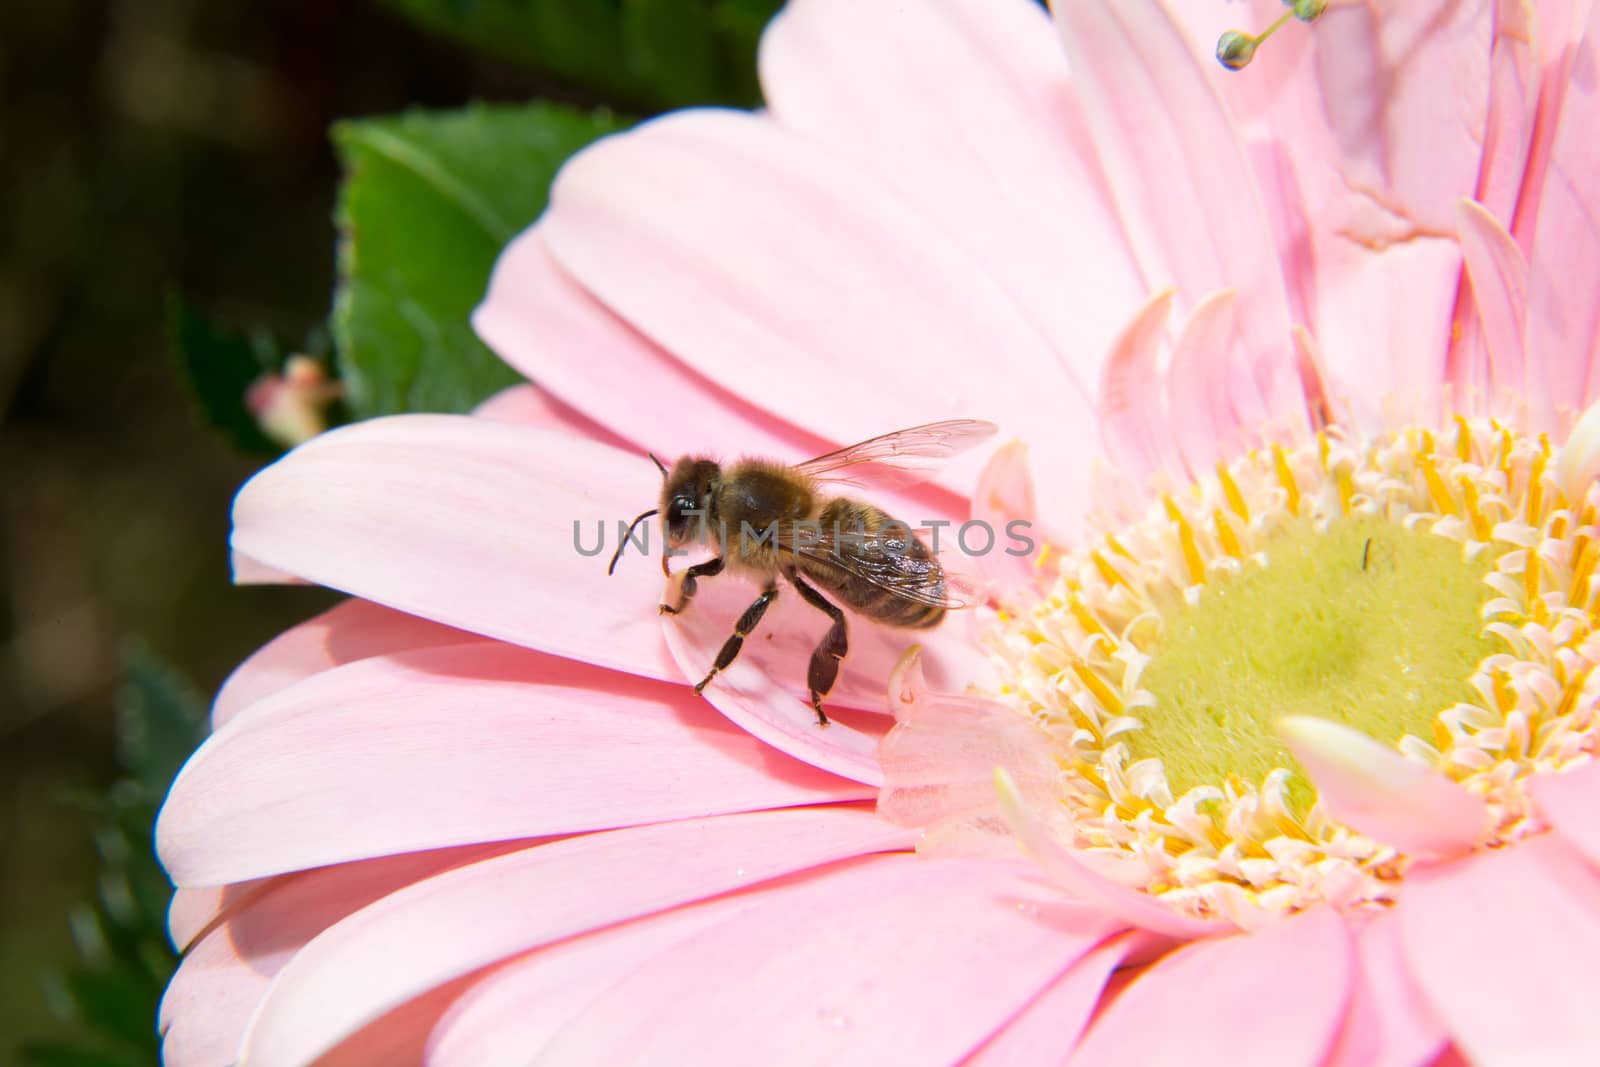 Bee collecting honey or pollen on a flower